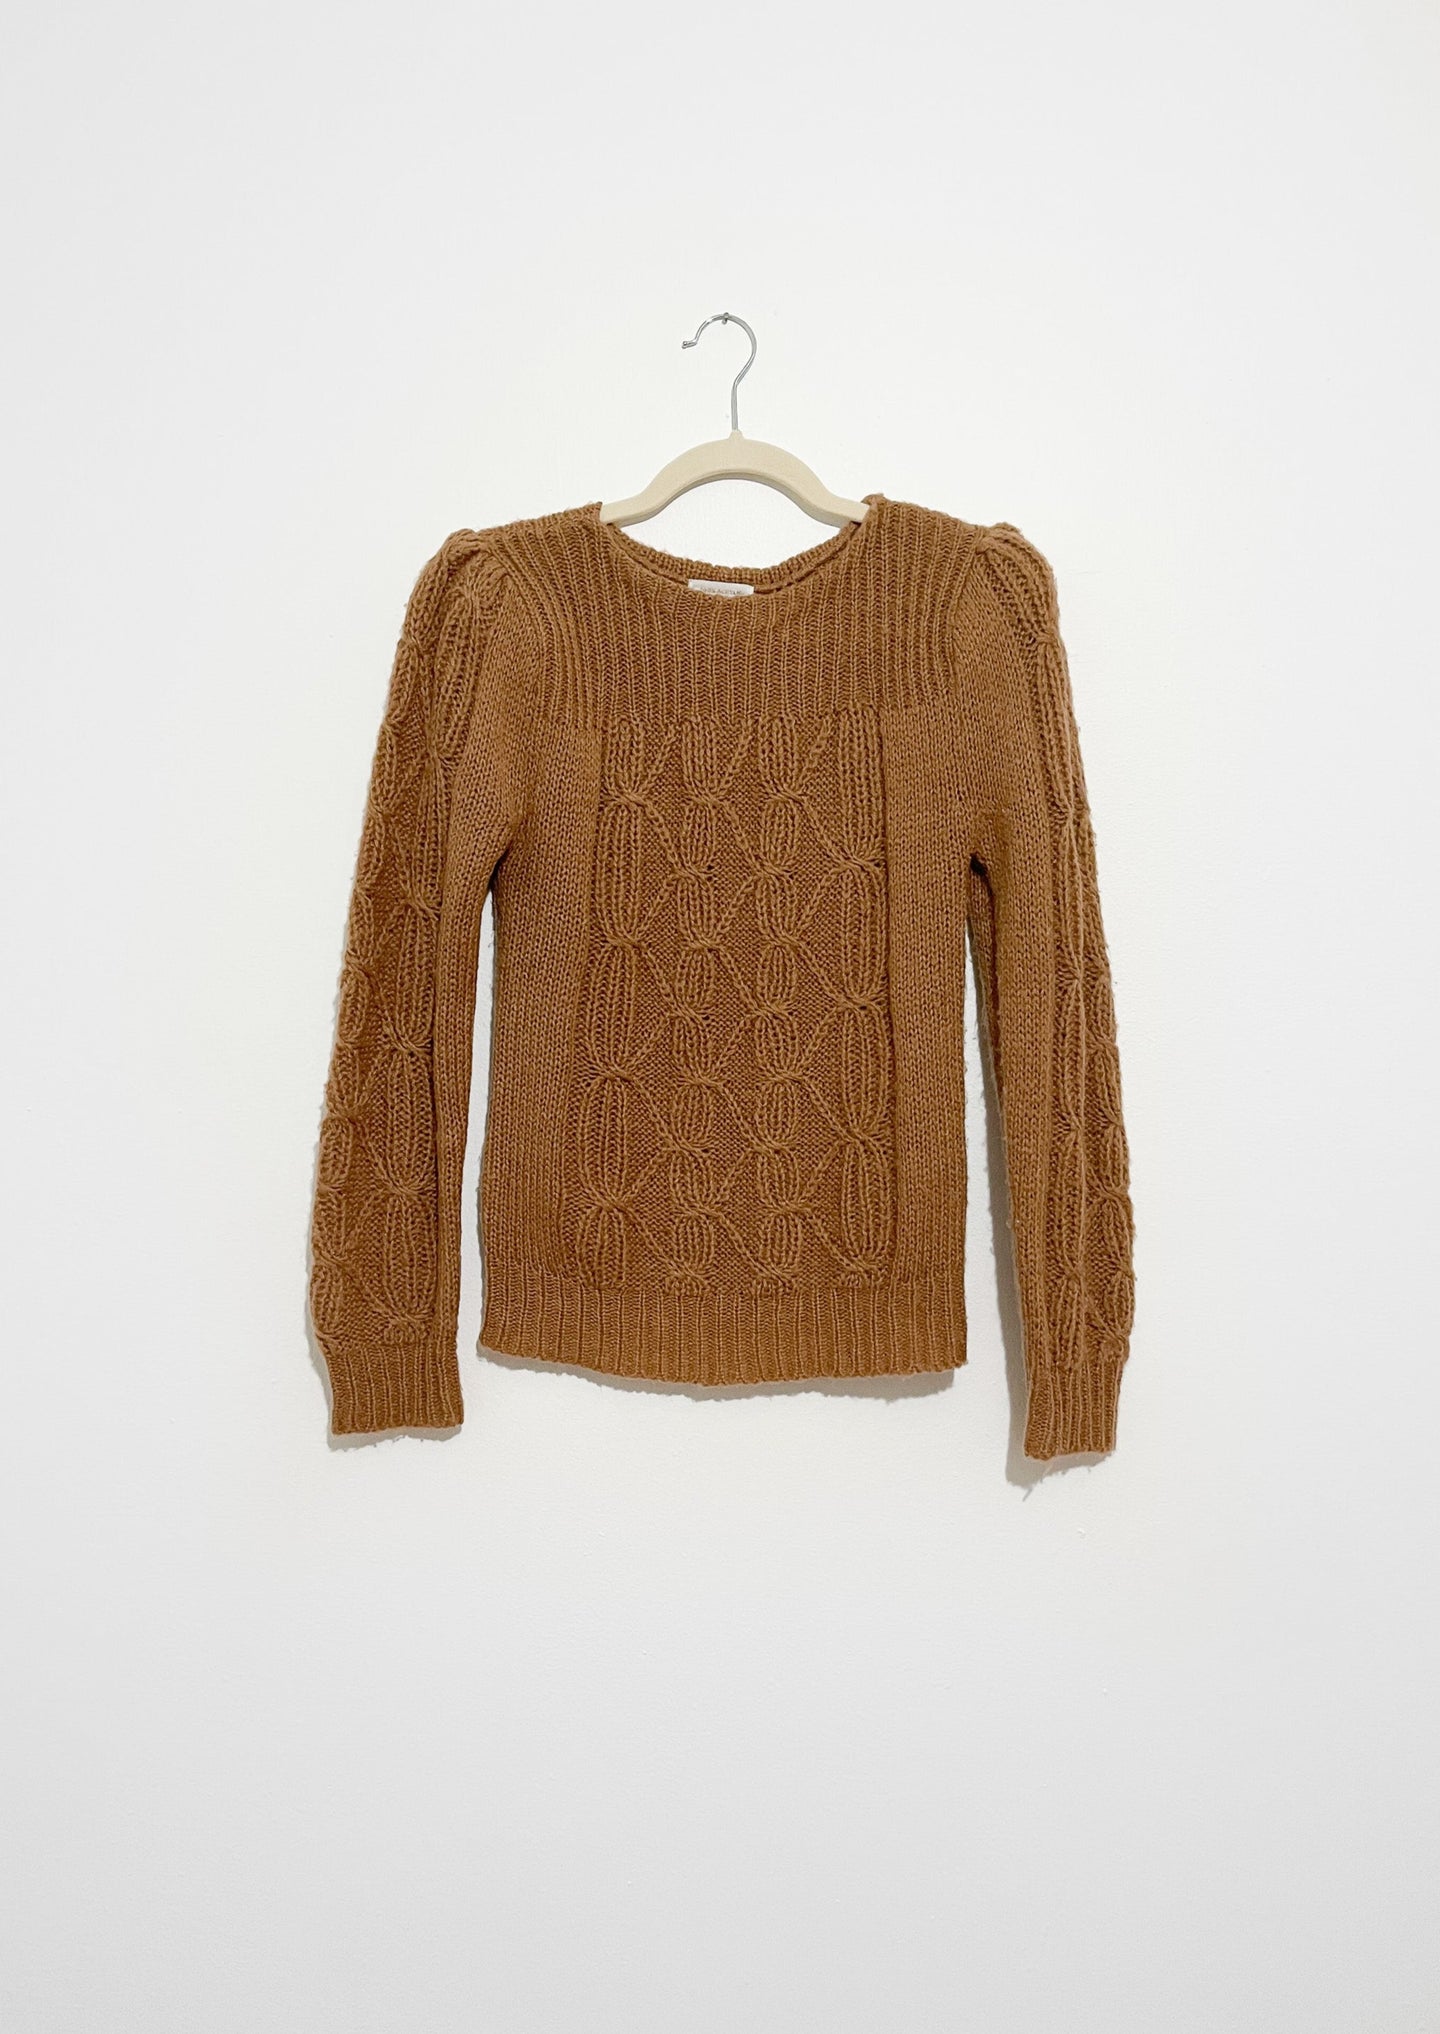 Vintage Taupe Cable Knit Sweater | XS - M